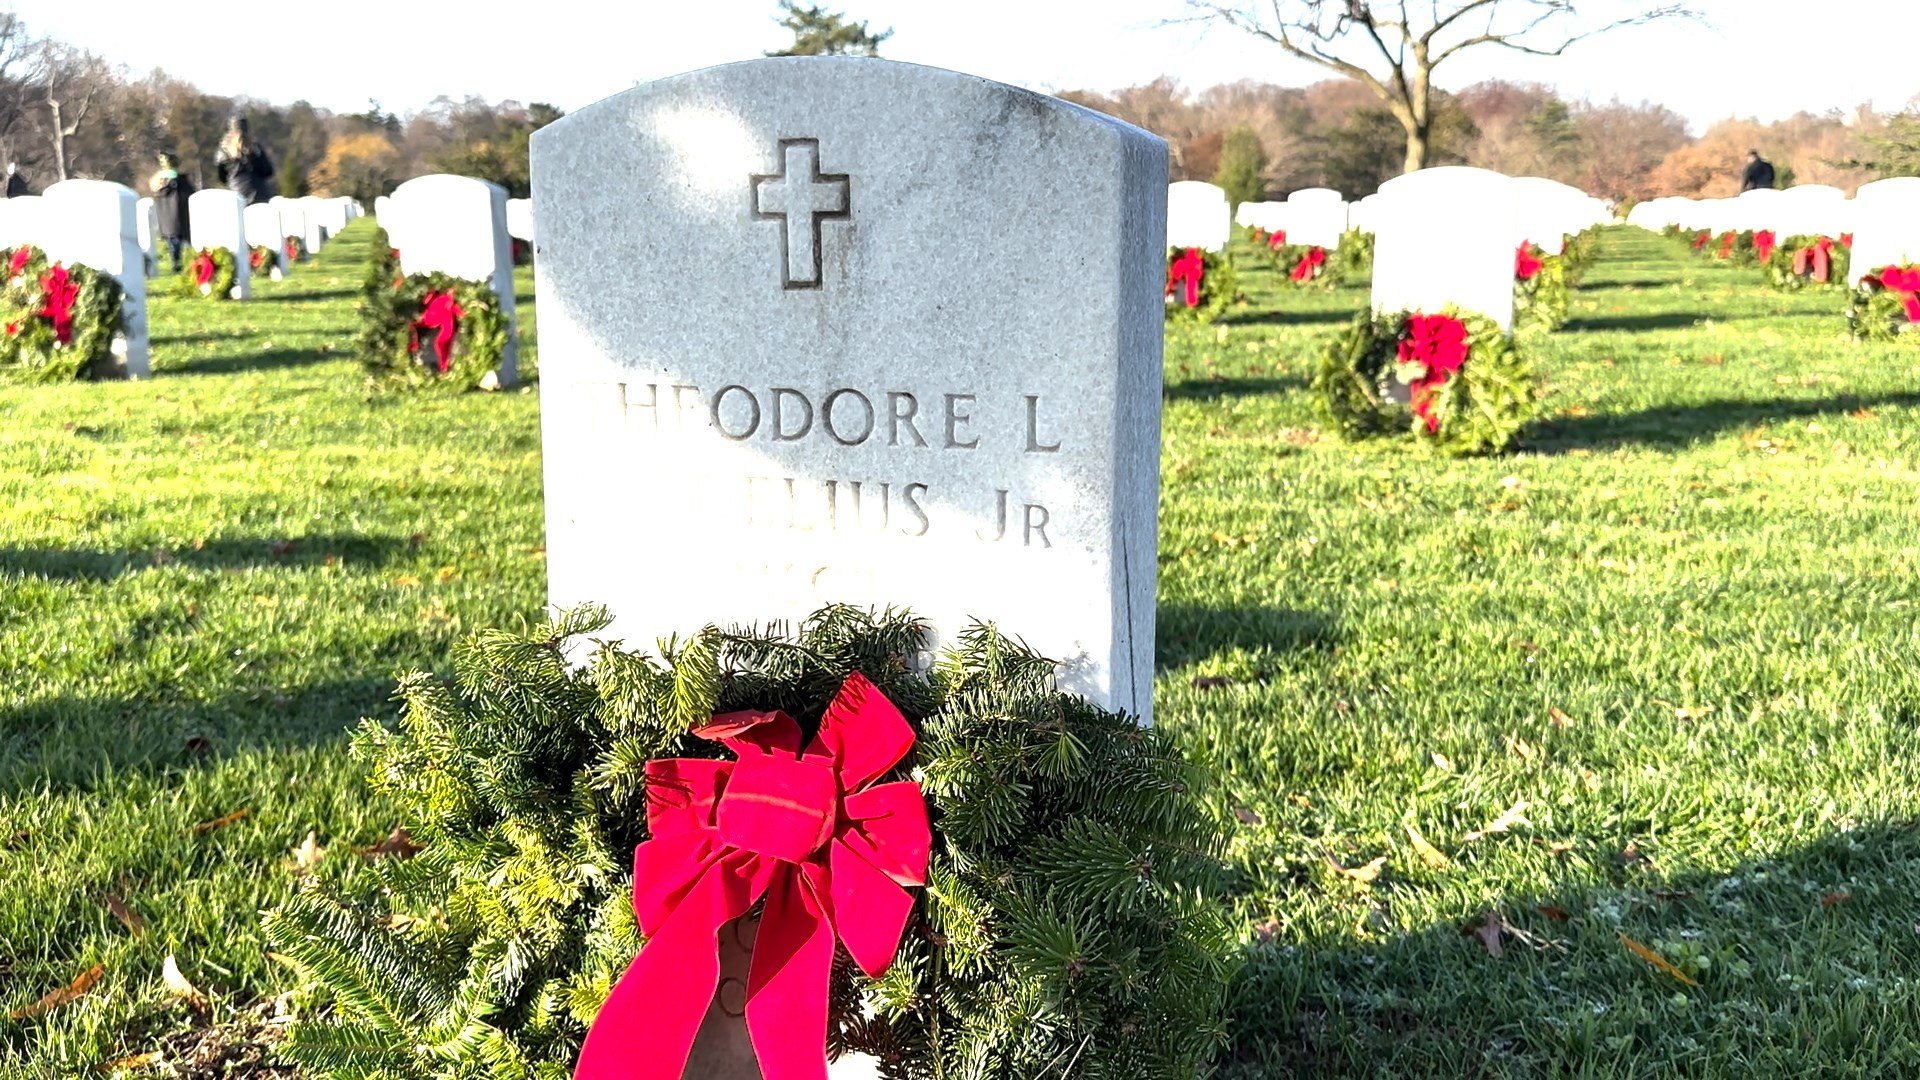 Thousands Place Wreaths at Arlington National Cemetery to Honor Service Members